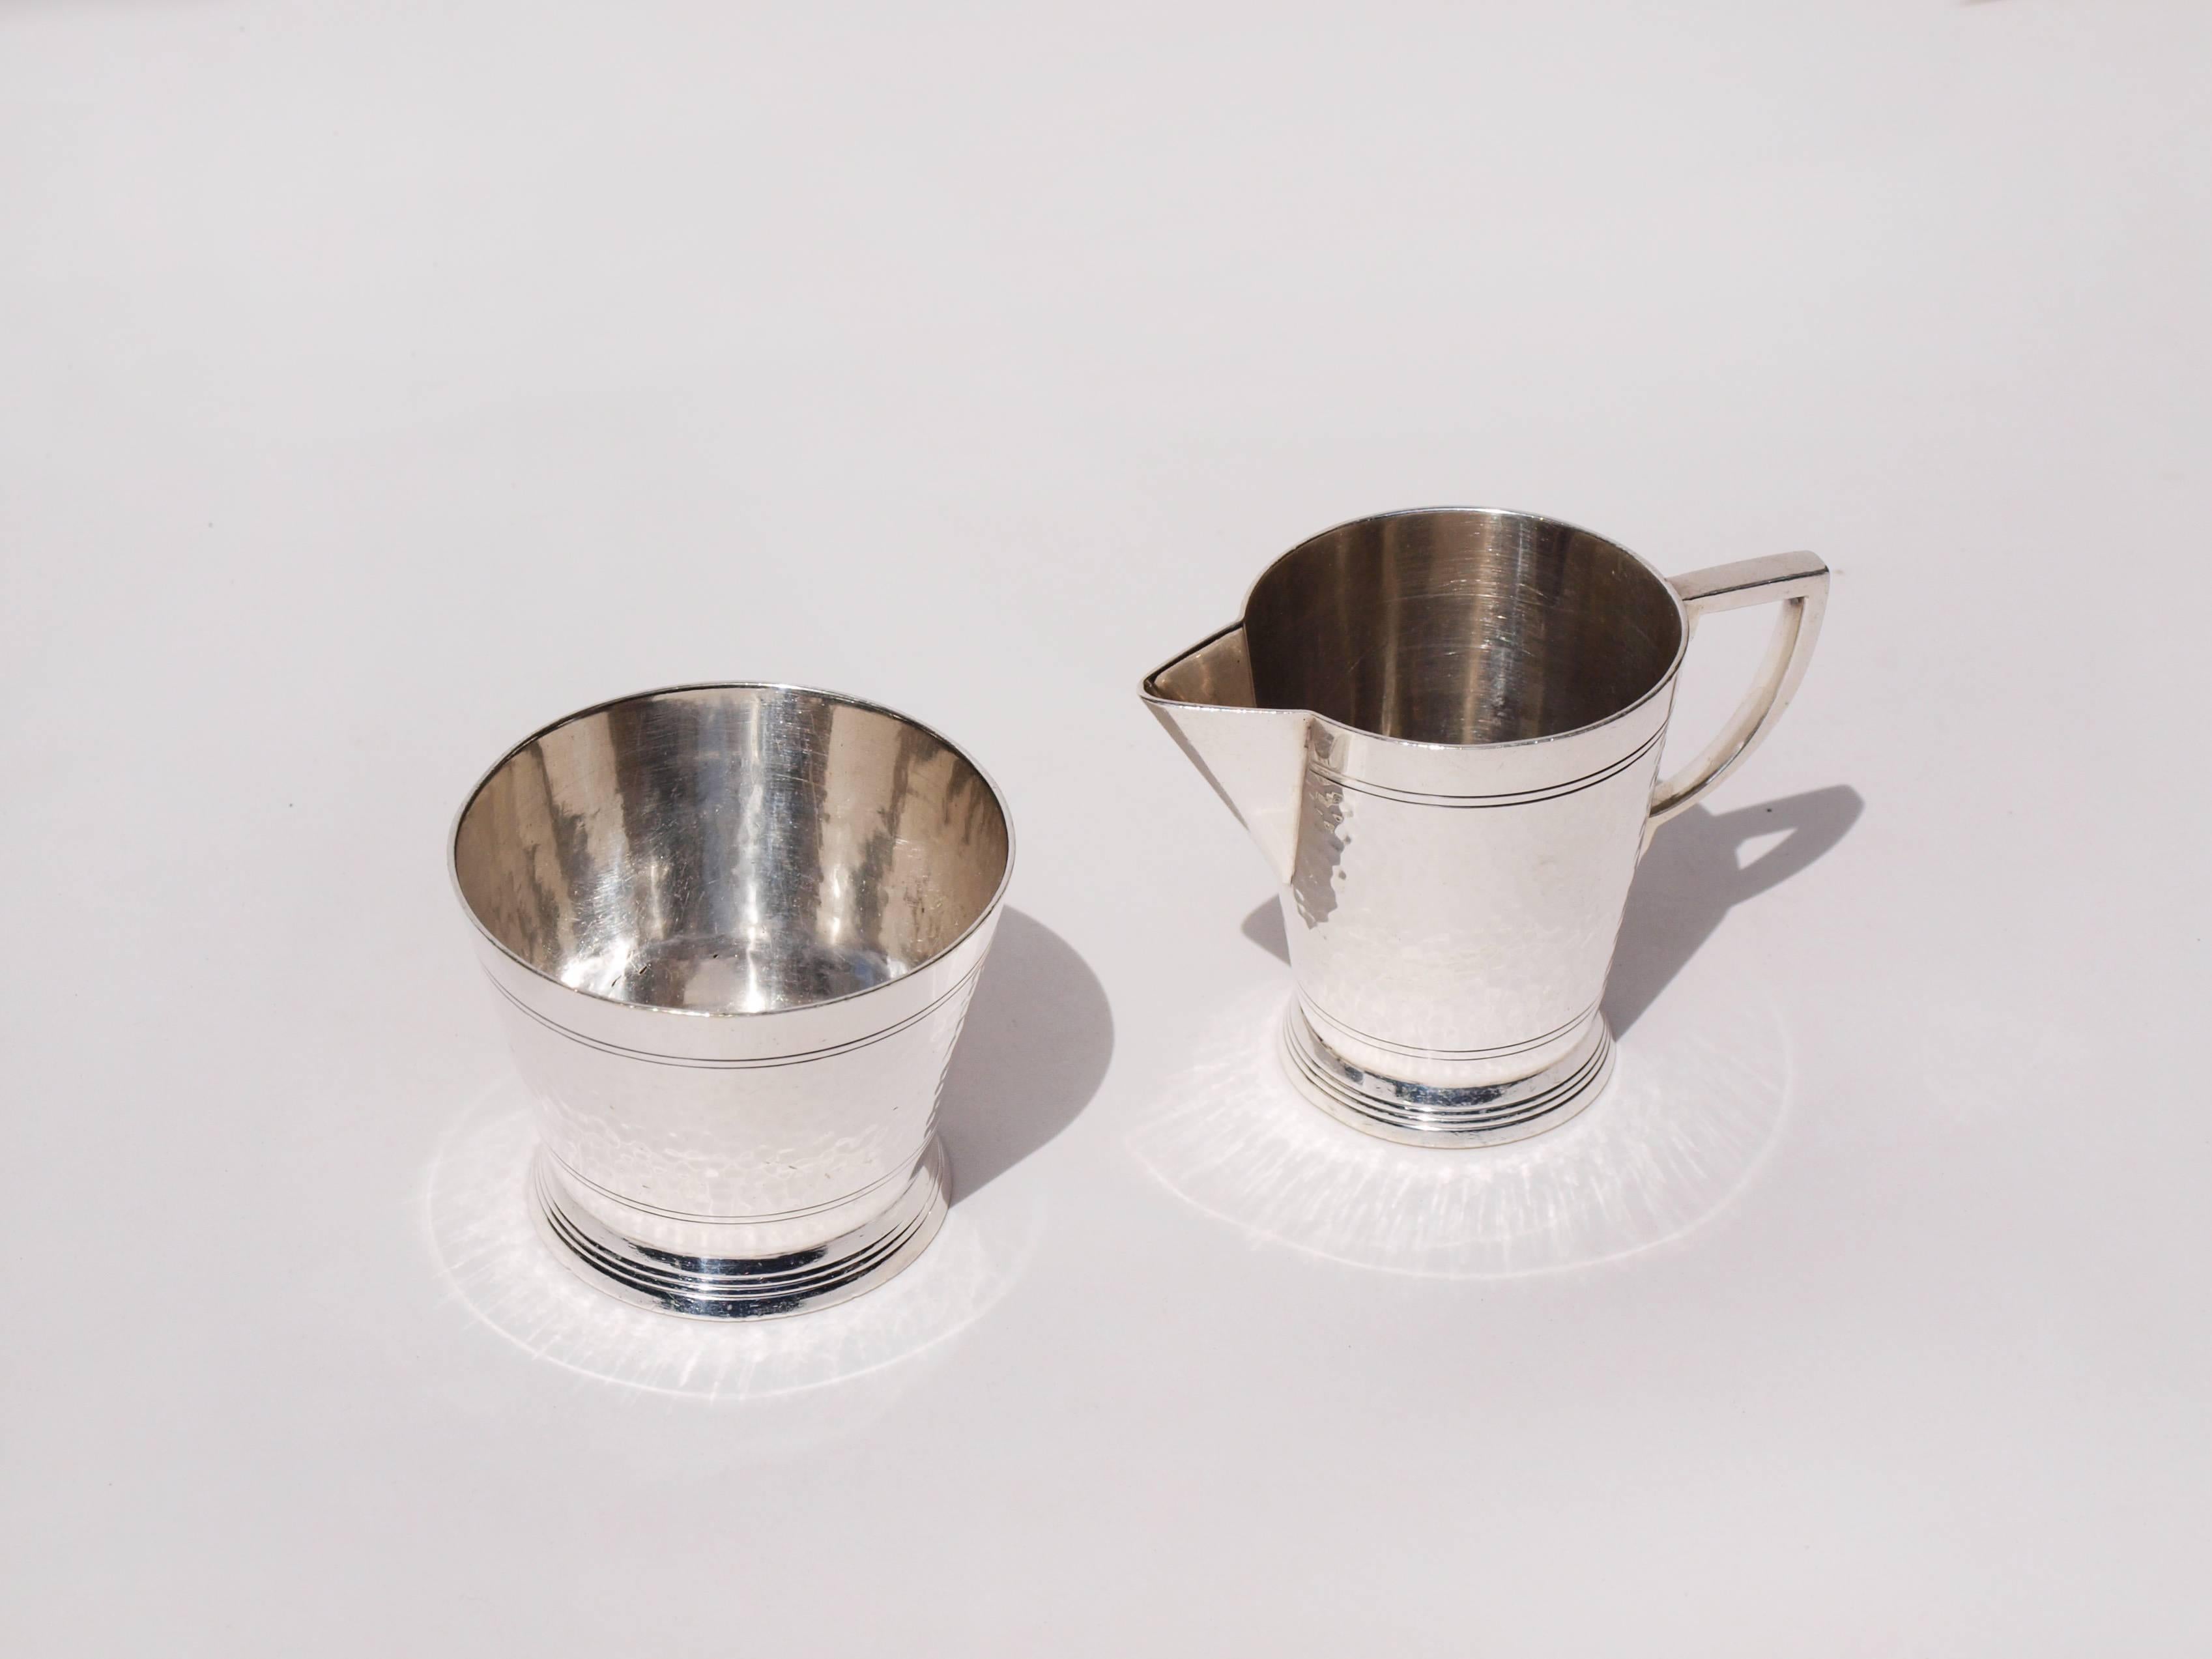 A rare Art Deco silver plated Mappin & Webb sugar bowler and milk jug designed by Keith Murray in the1930s with references and attributions in both the Vand A Museum and found in the Gemini book on Keith Murray.

The flared base has three incised